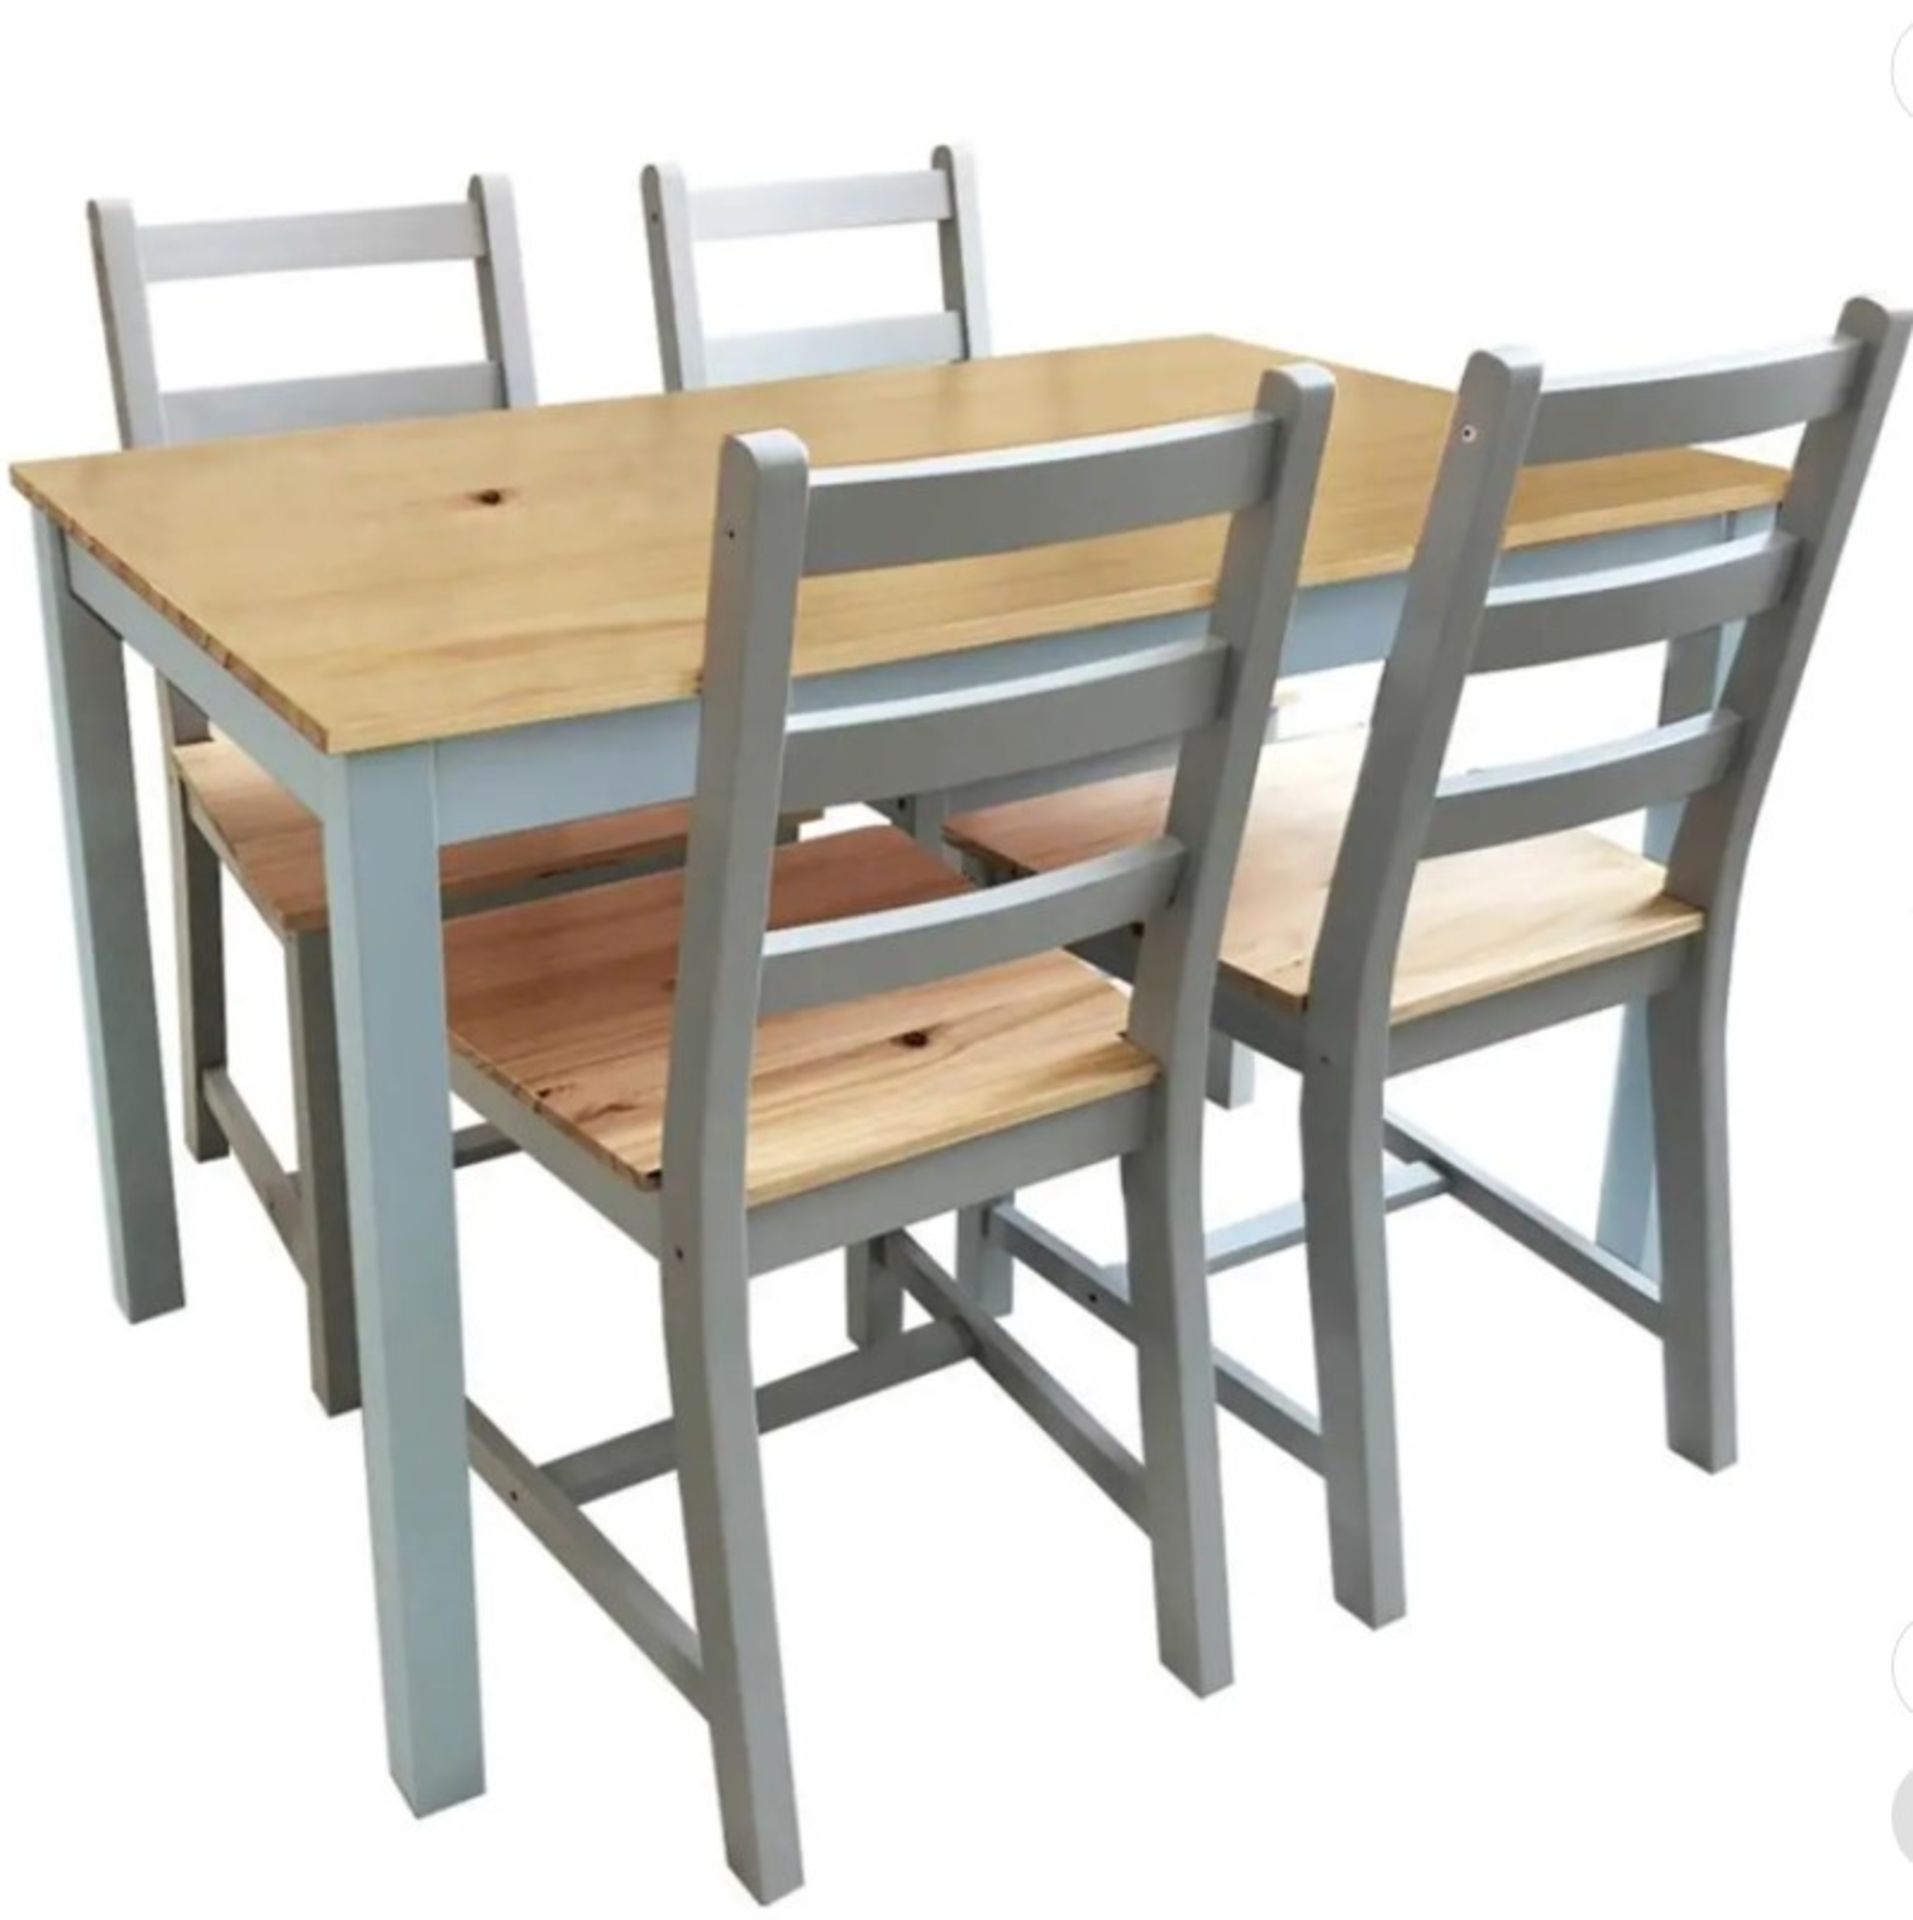 (8A) 1x Mortimer Pine Dining Set With 4 Chairs RRP £200. Pine Table Top. Table: (H)73 x (W)75 x (L)